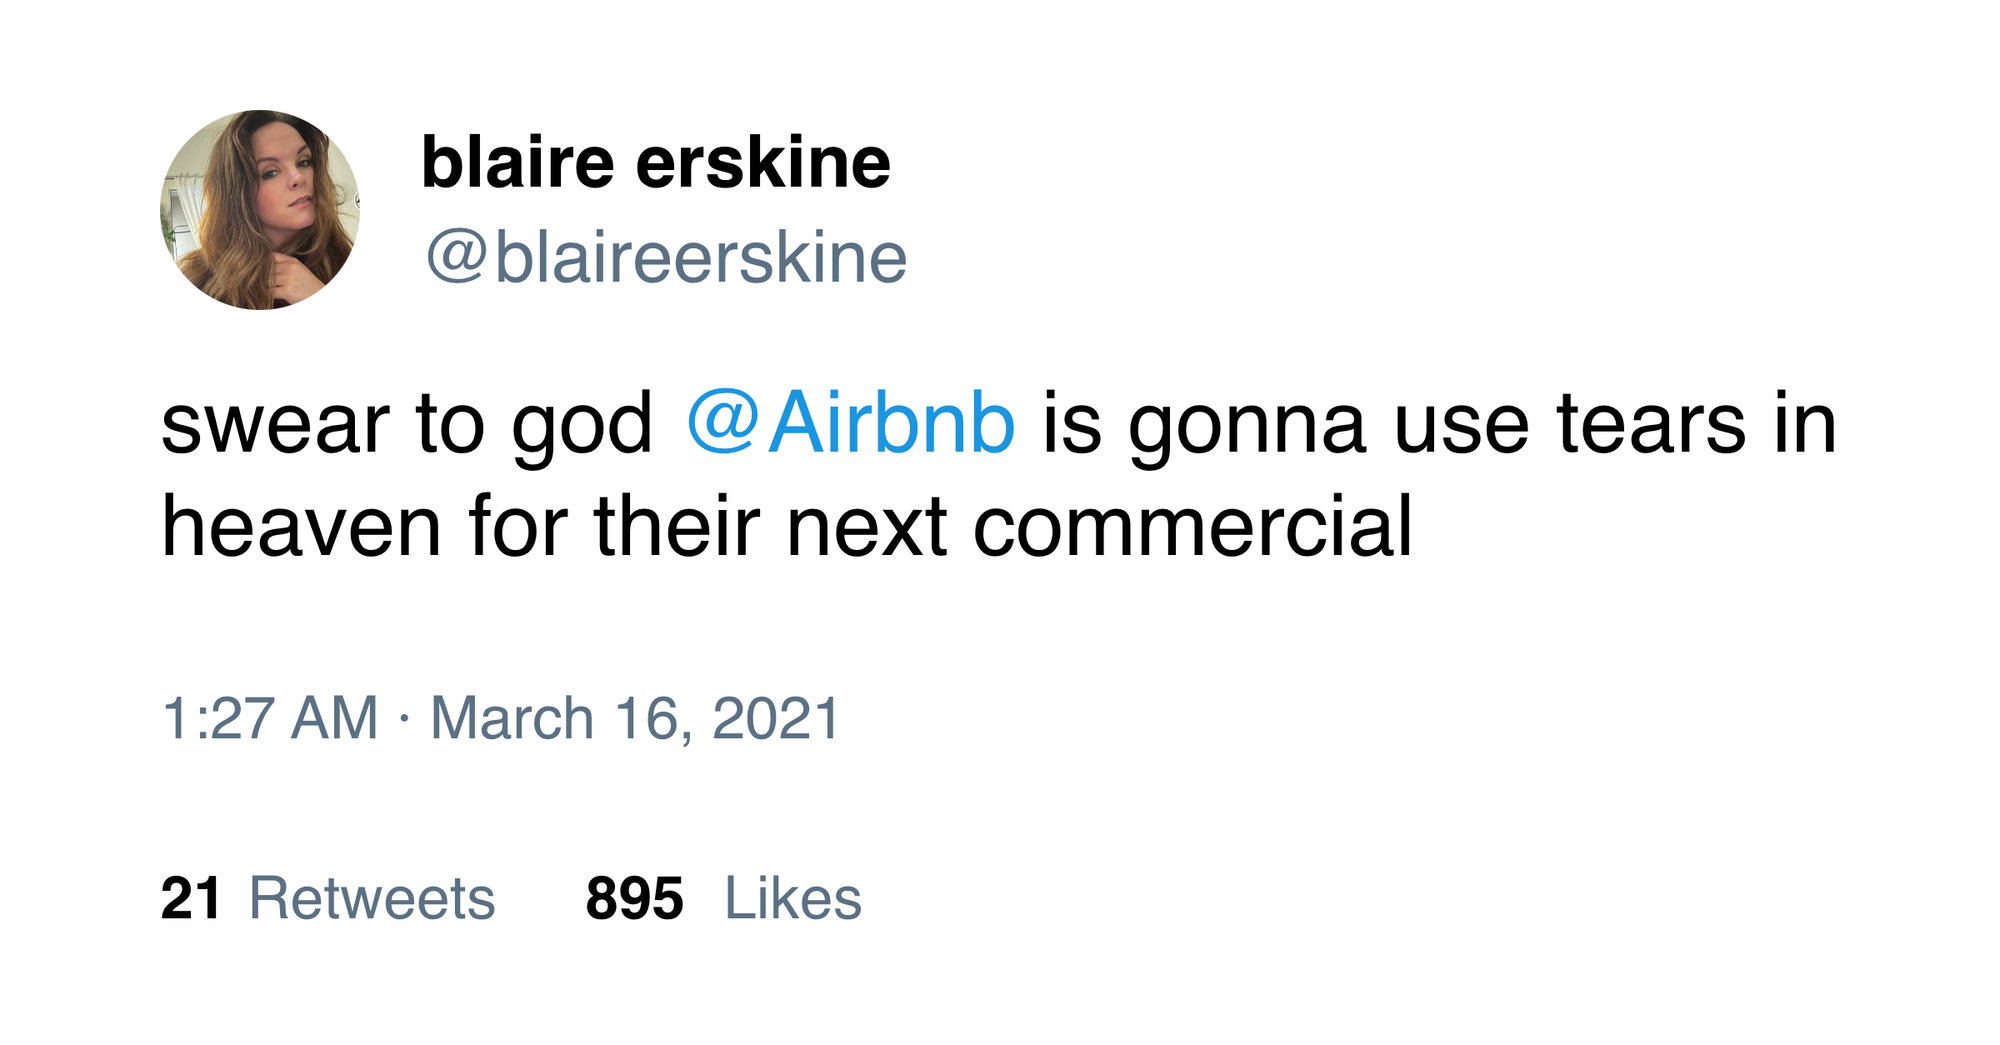 @blaireerskine on Twitter: "swear to god @Airbnb is gonna use tears in heaven for their next commercial"